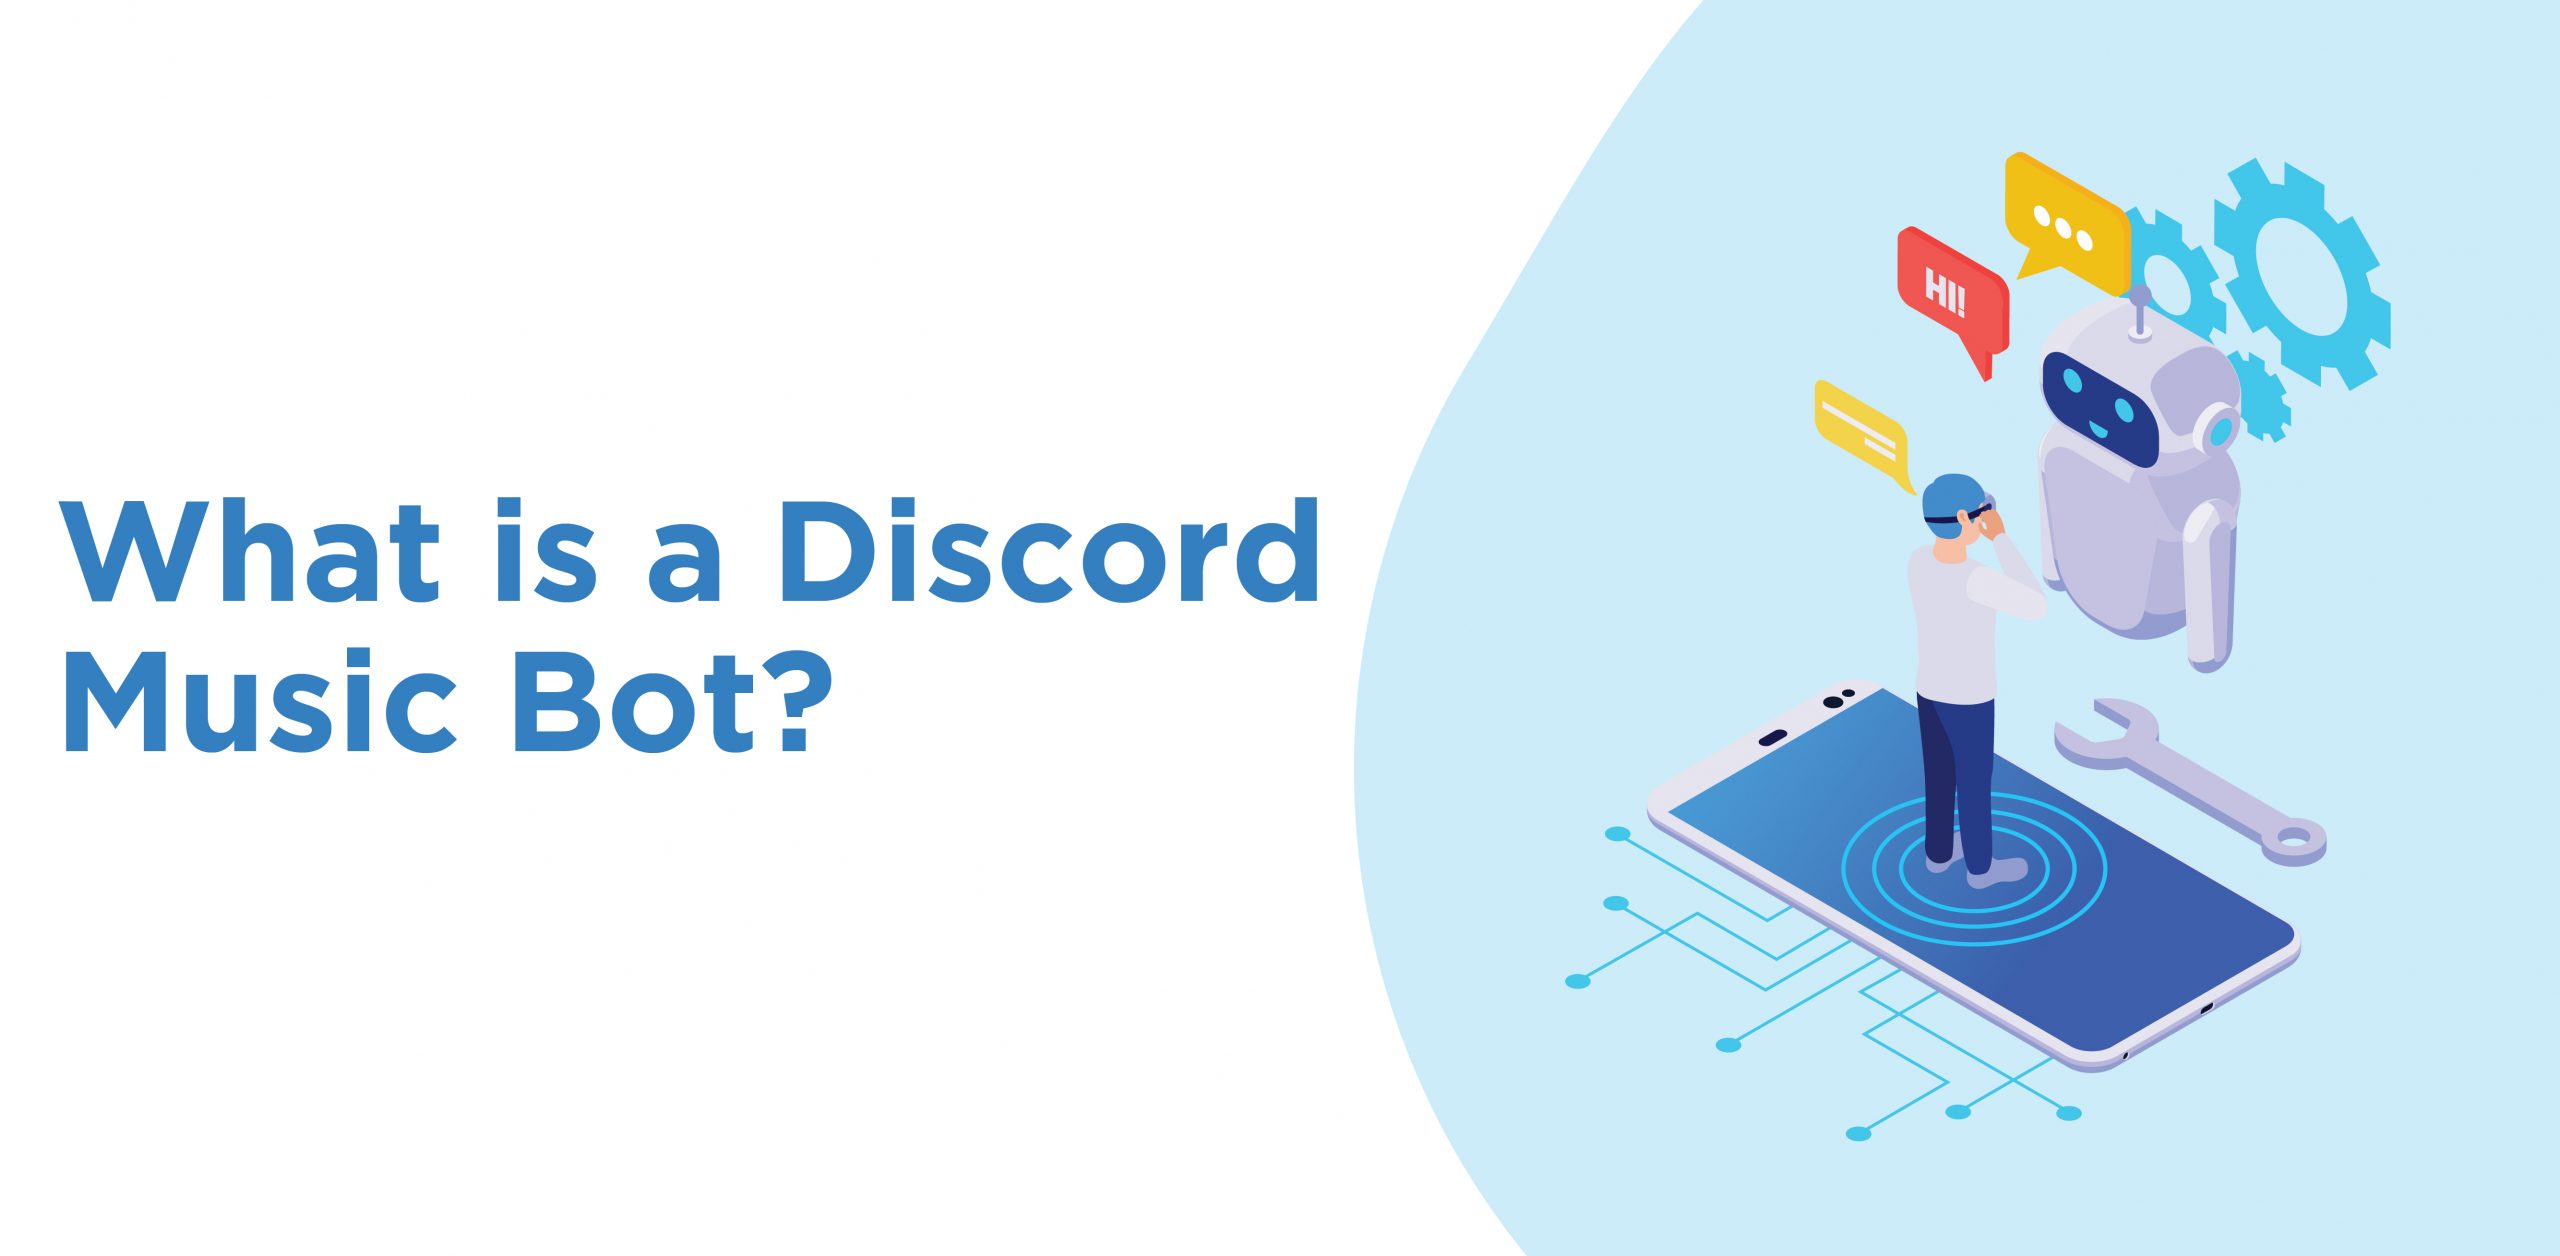 What is a Discord Music Bot?